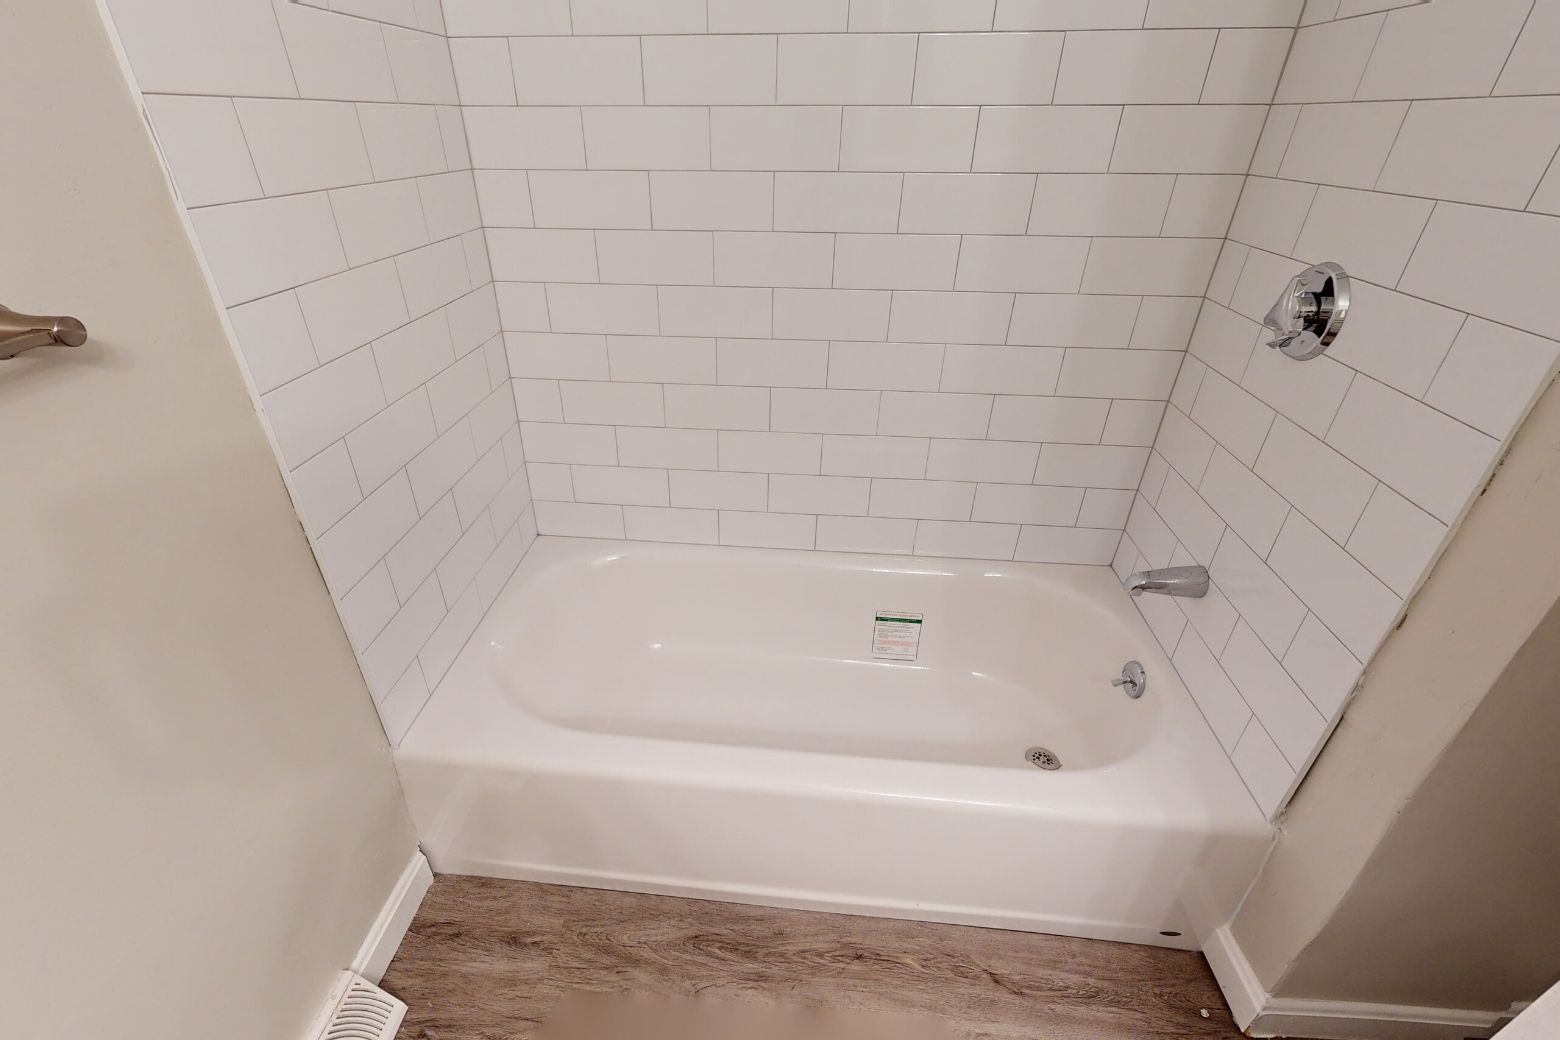 Bathtub Refinishing: Process, Cost, and Is it Worth It?